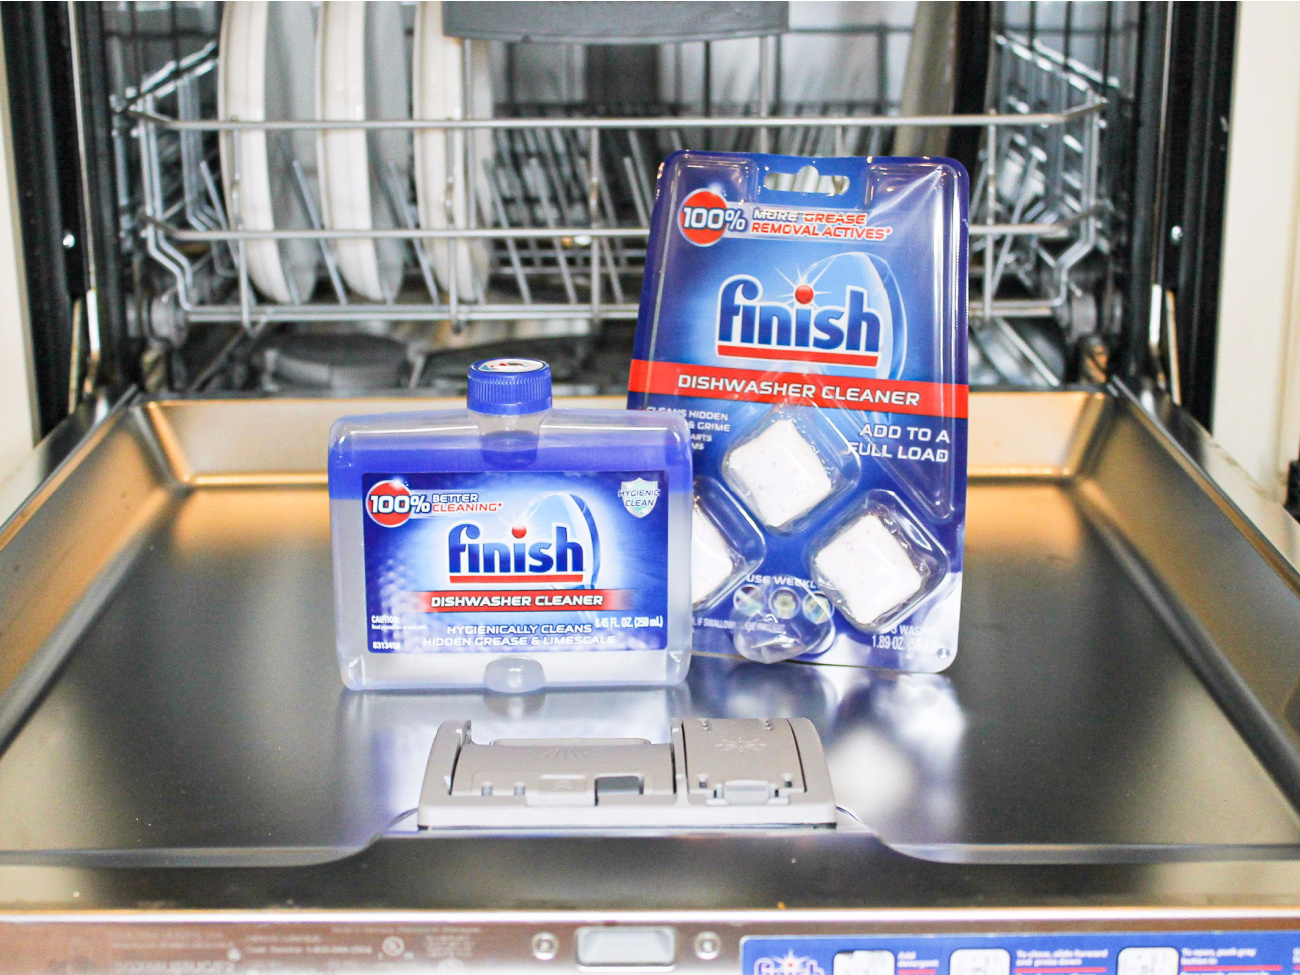 Save On Finish Dishwasher Products At Publix – Cleaner As Low As $2.39